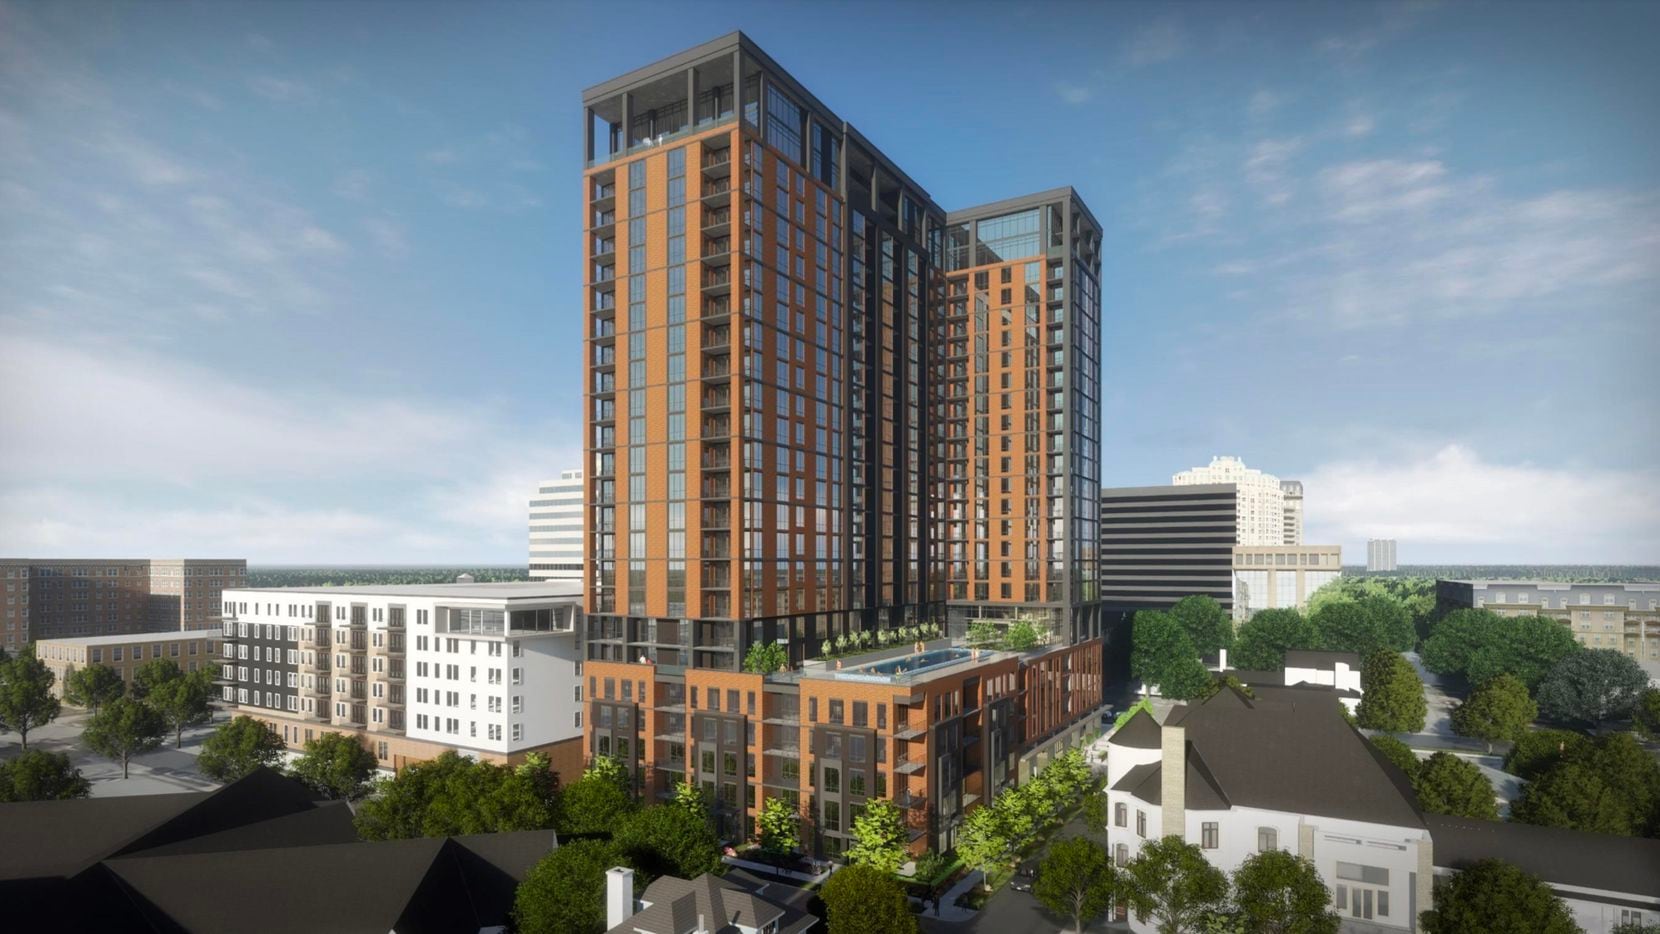 Apartment builder Toll Brothers is planning a 25-story residential tower on Cedar Springs...